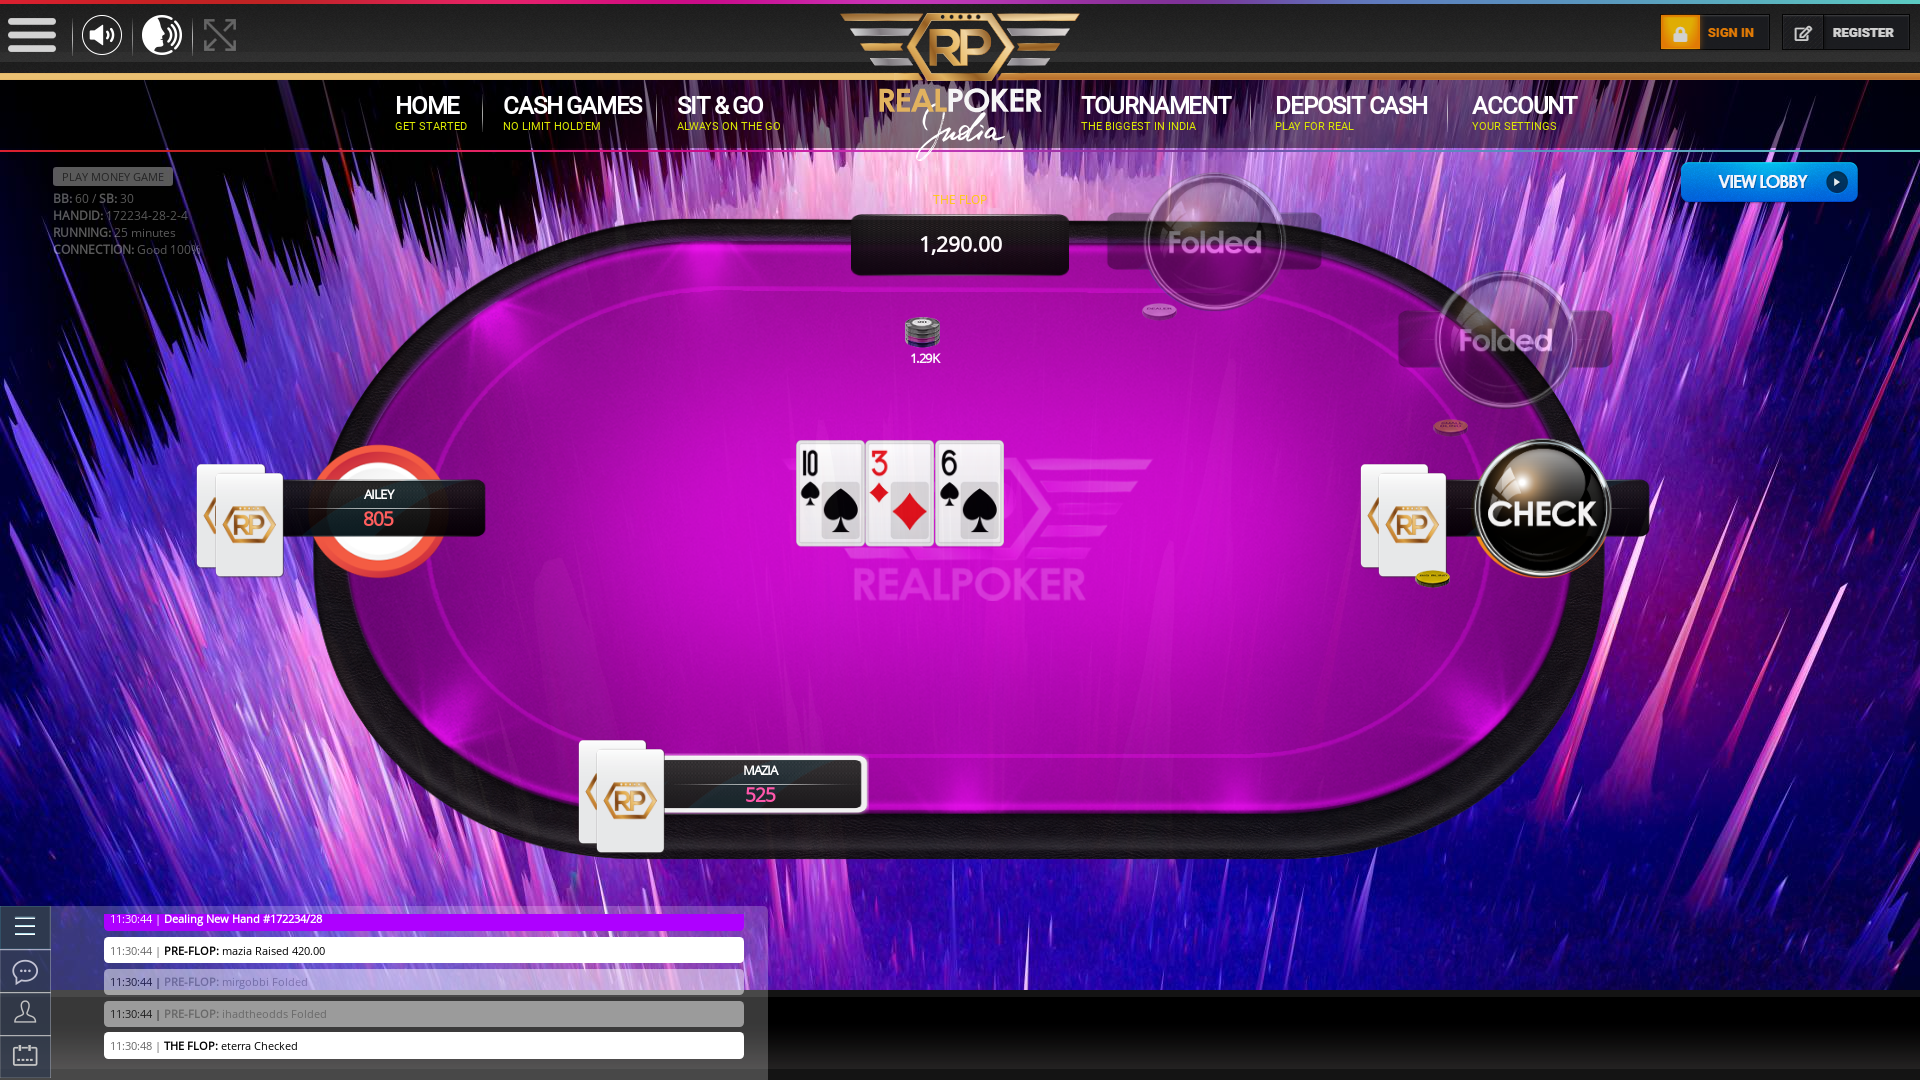 10 player poker in the 25th minute